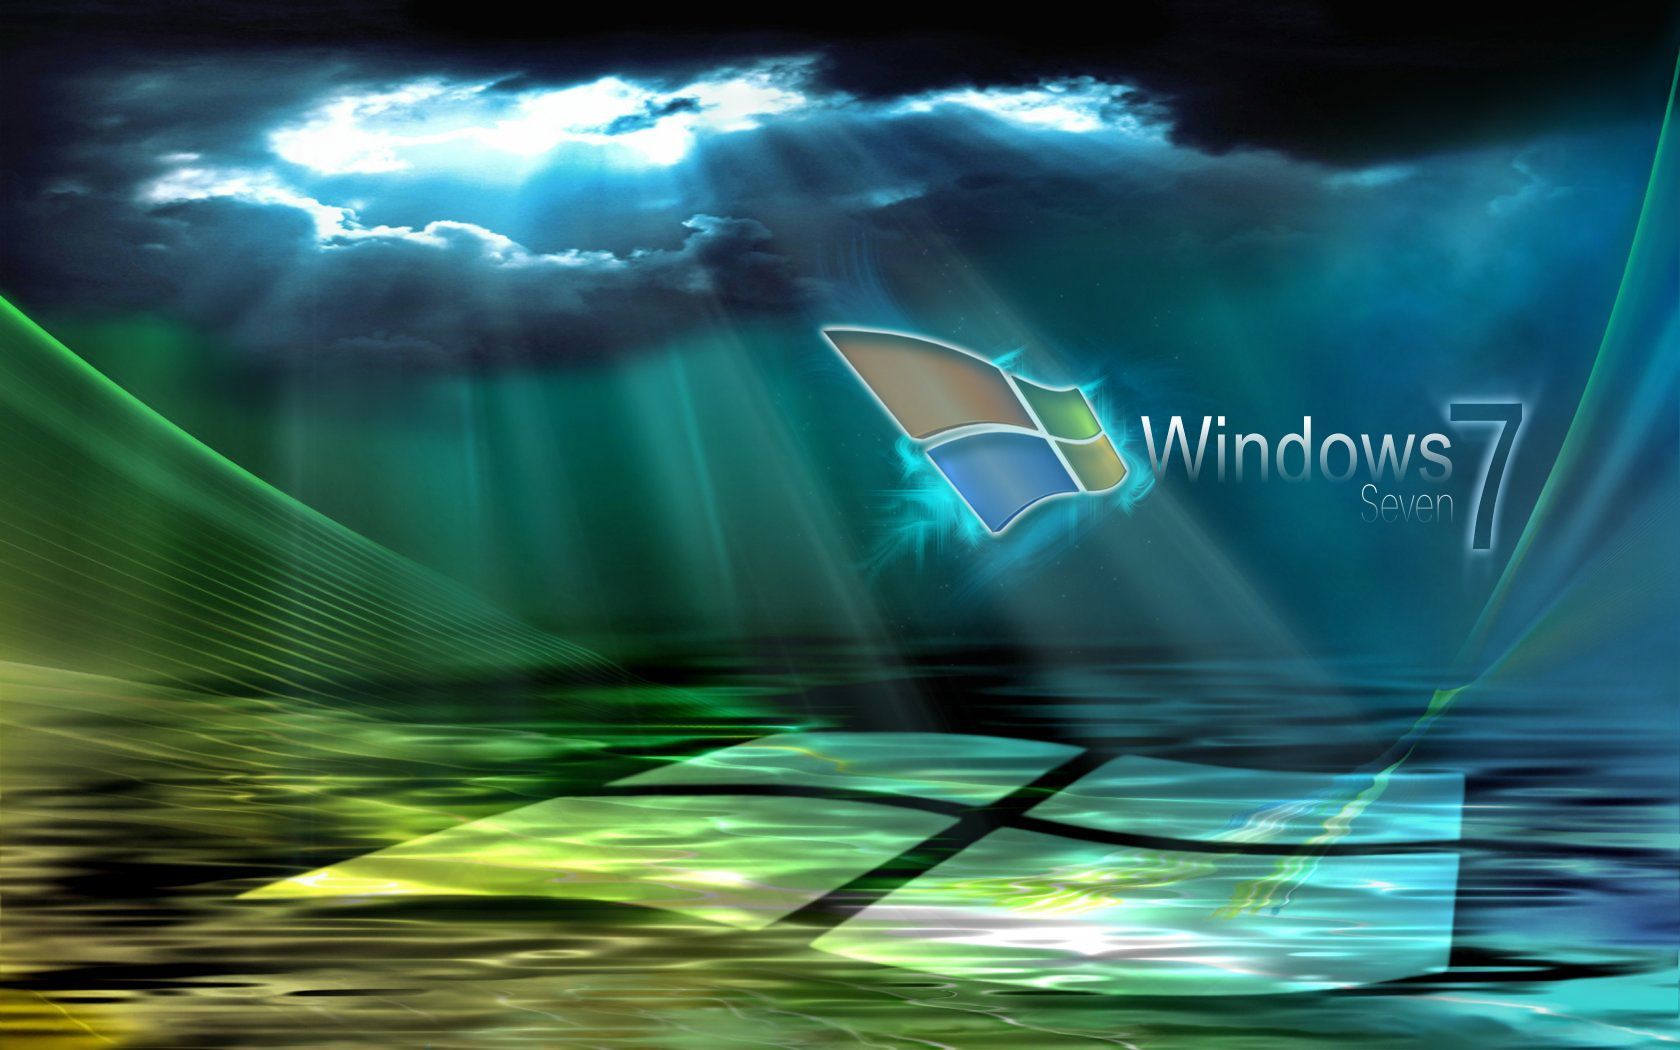 Windows 7 Backgrounds Pictures - Wallpaper Cave